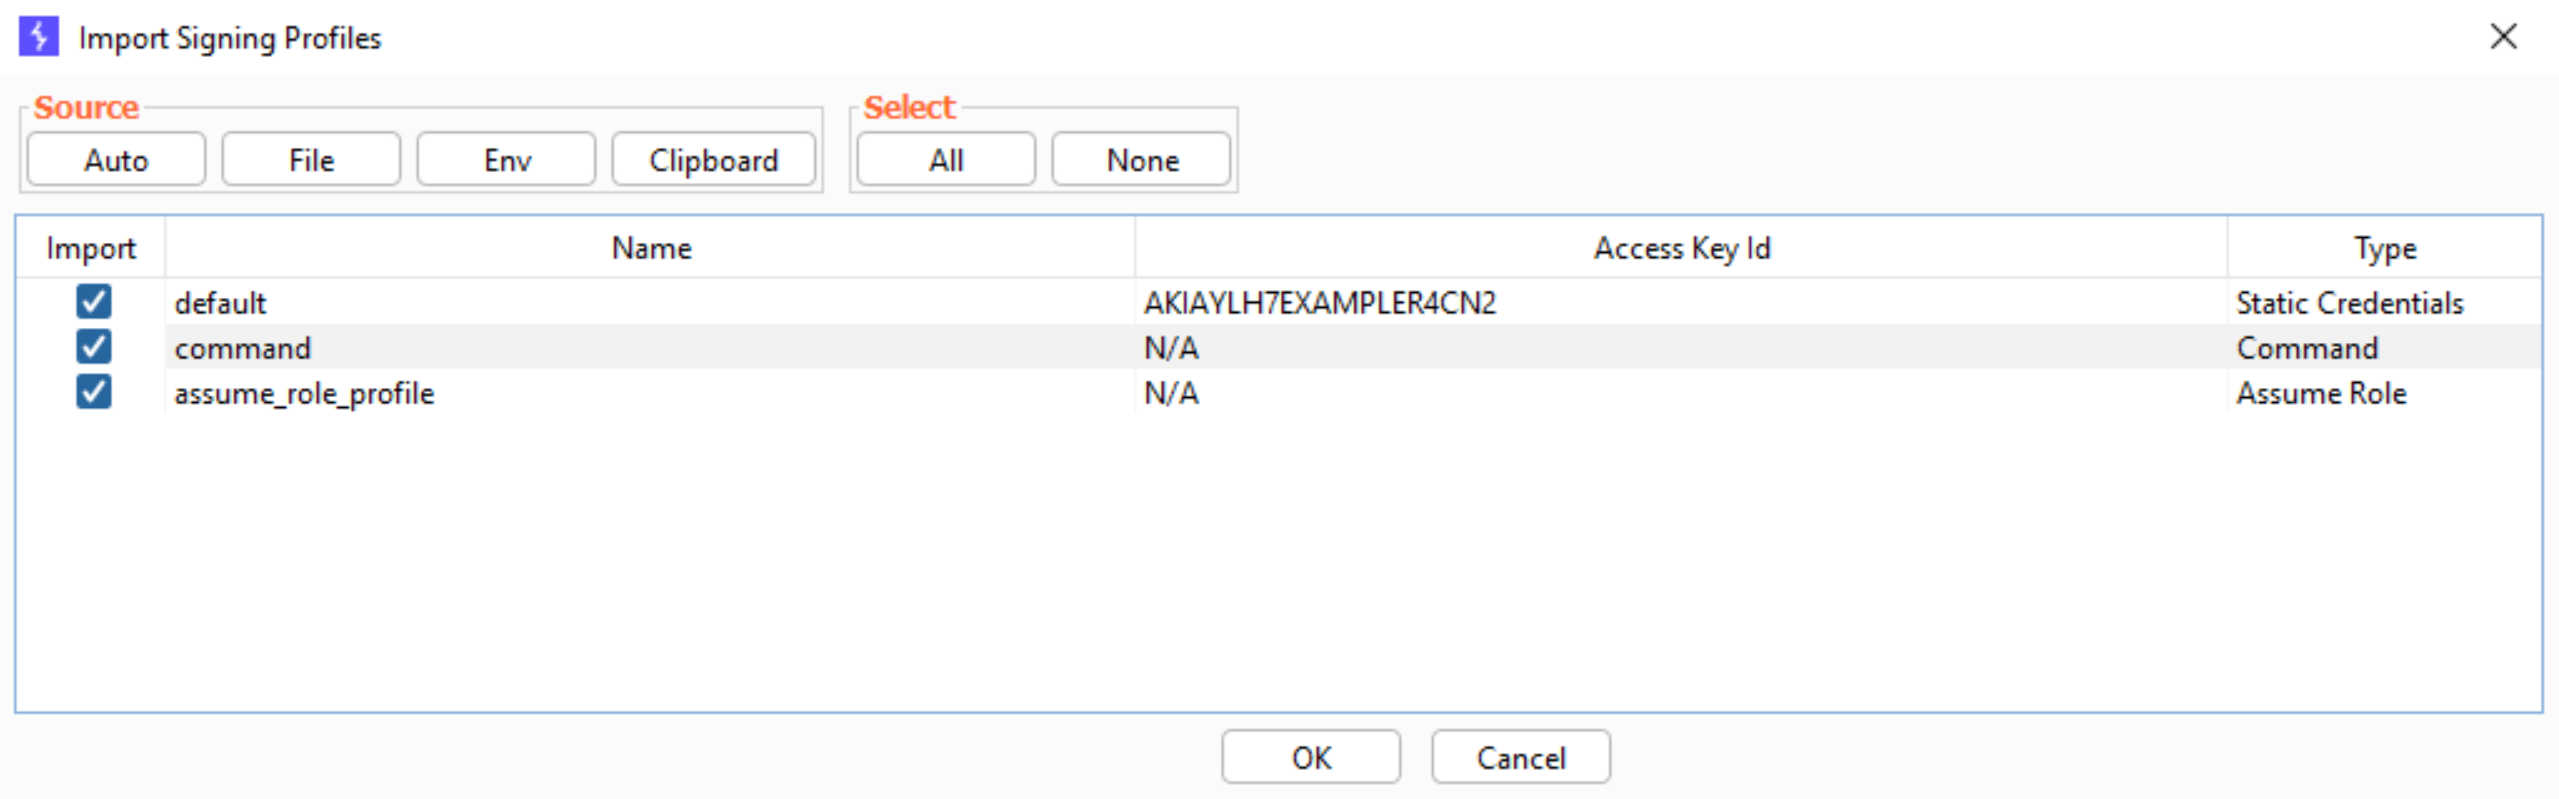 You can import profiles within Burp Suite using Auto, File, Env, and Clipboard.